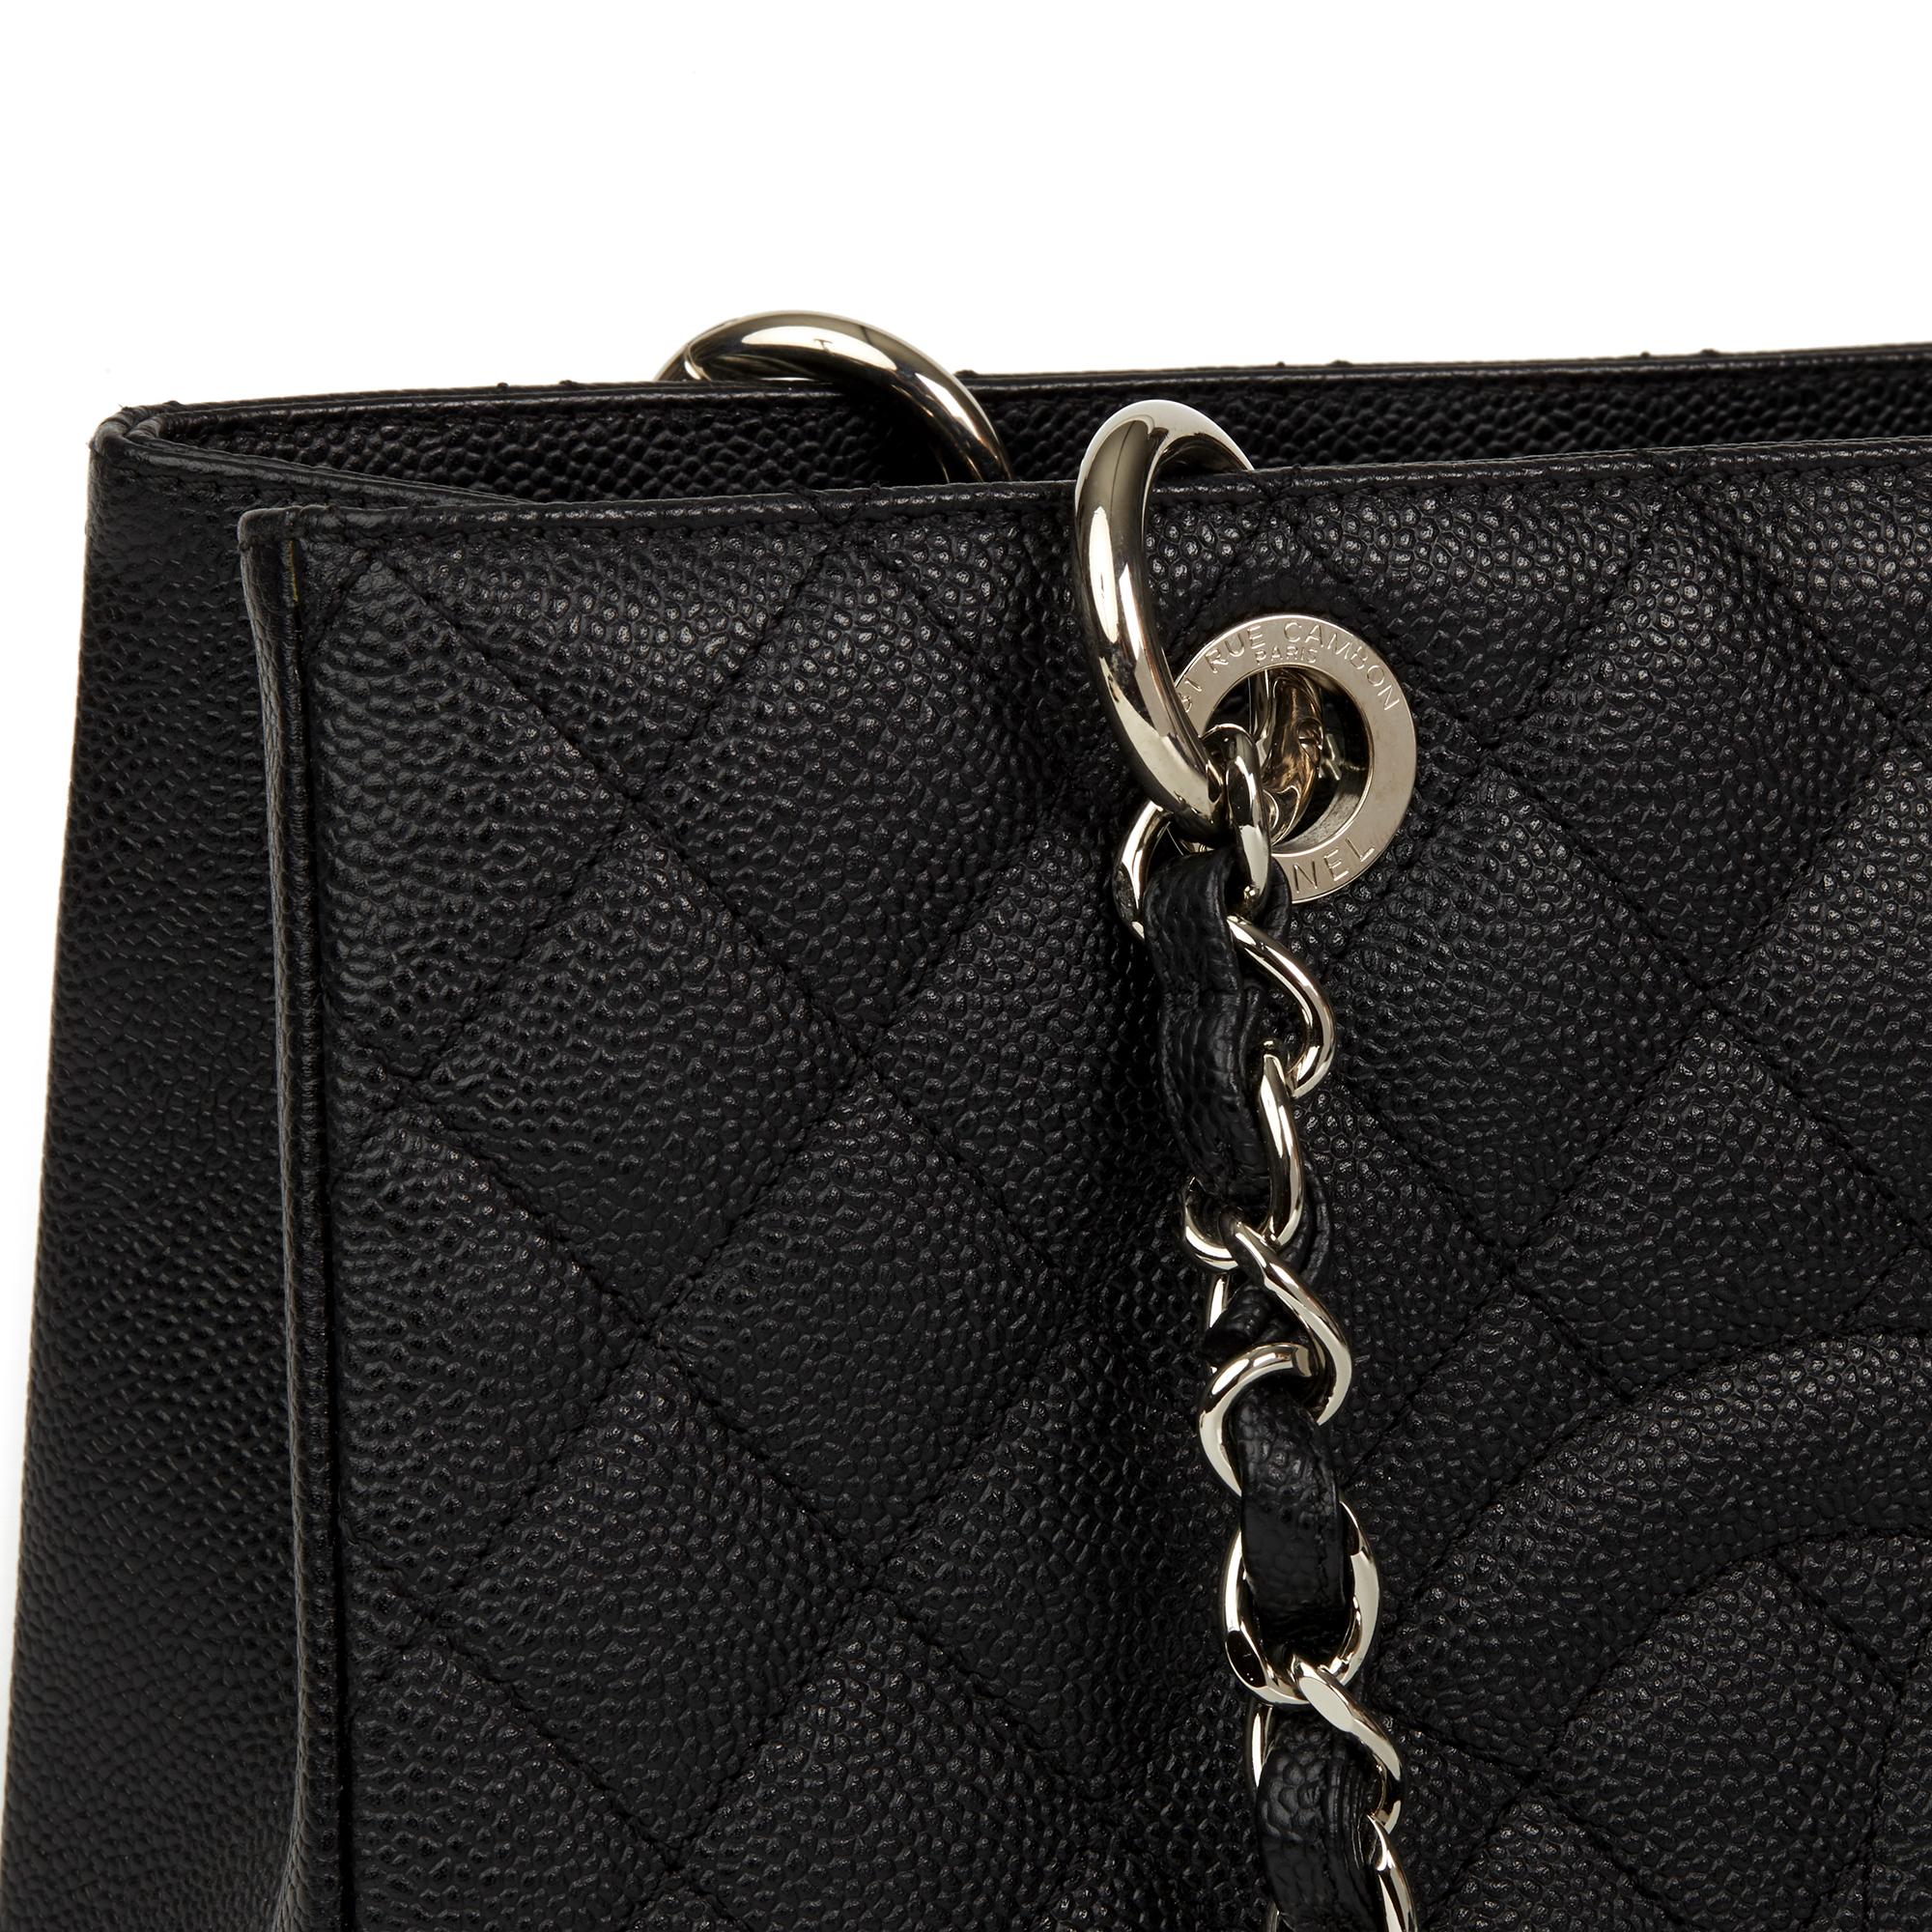 2014 Chanel Black Quilted Caviar Leather Grand Shopping Tote GST 3